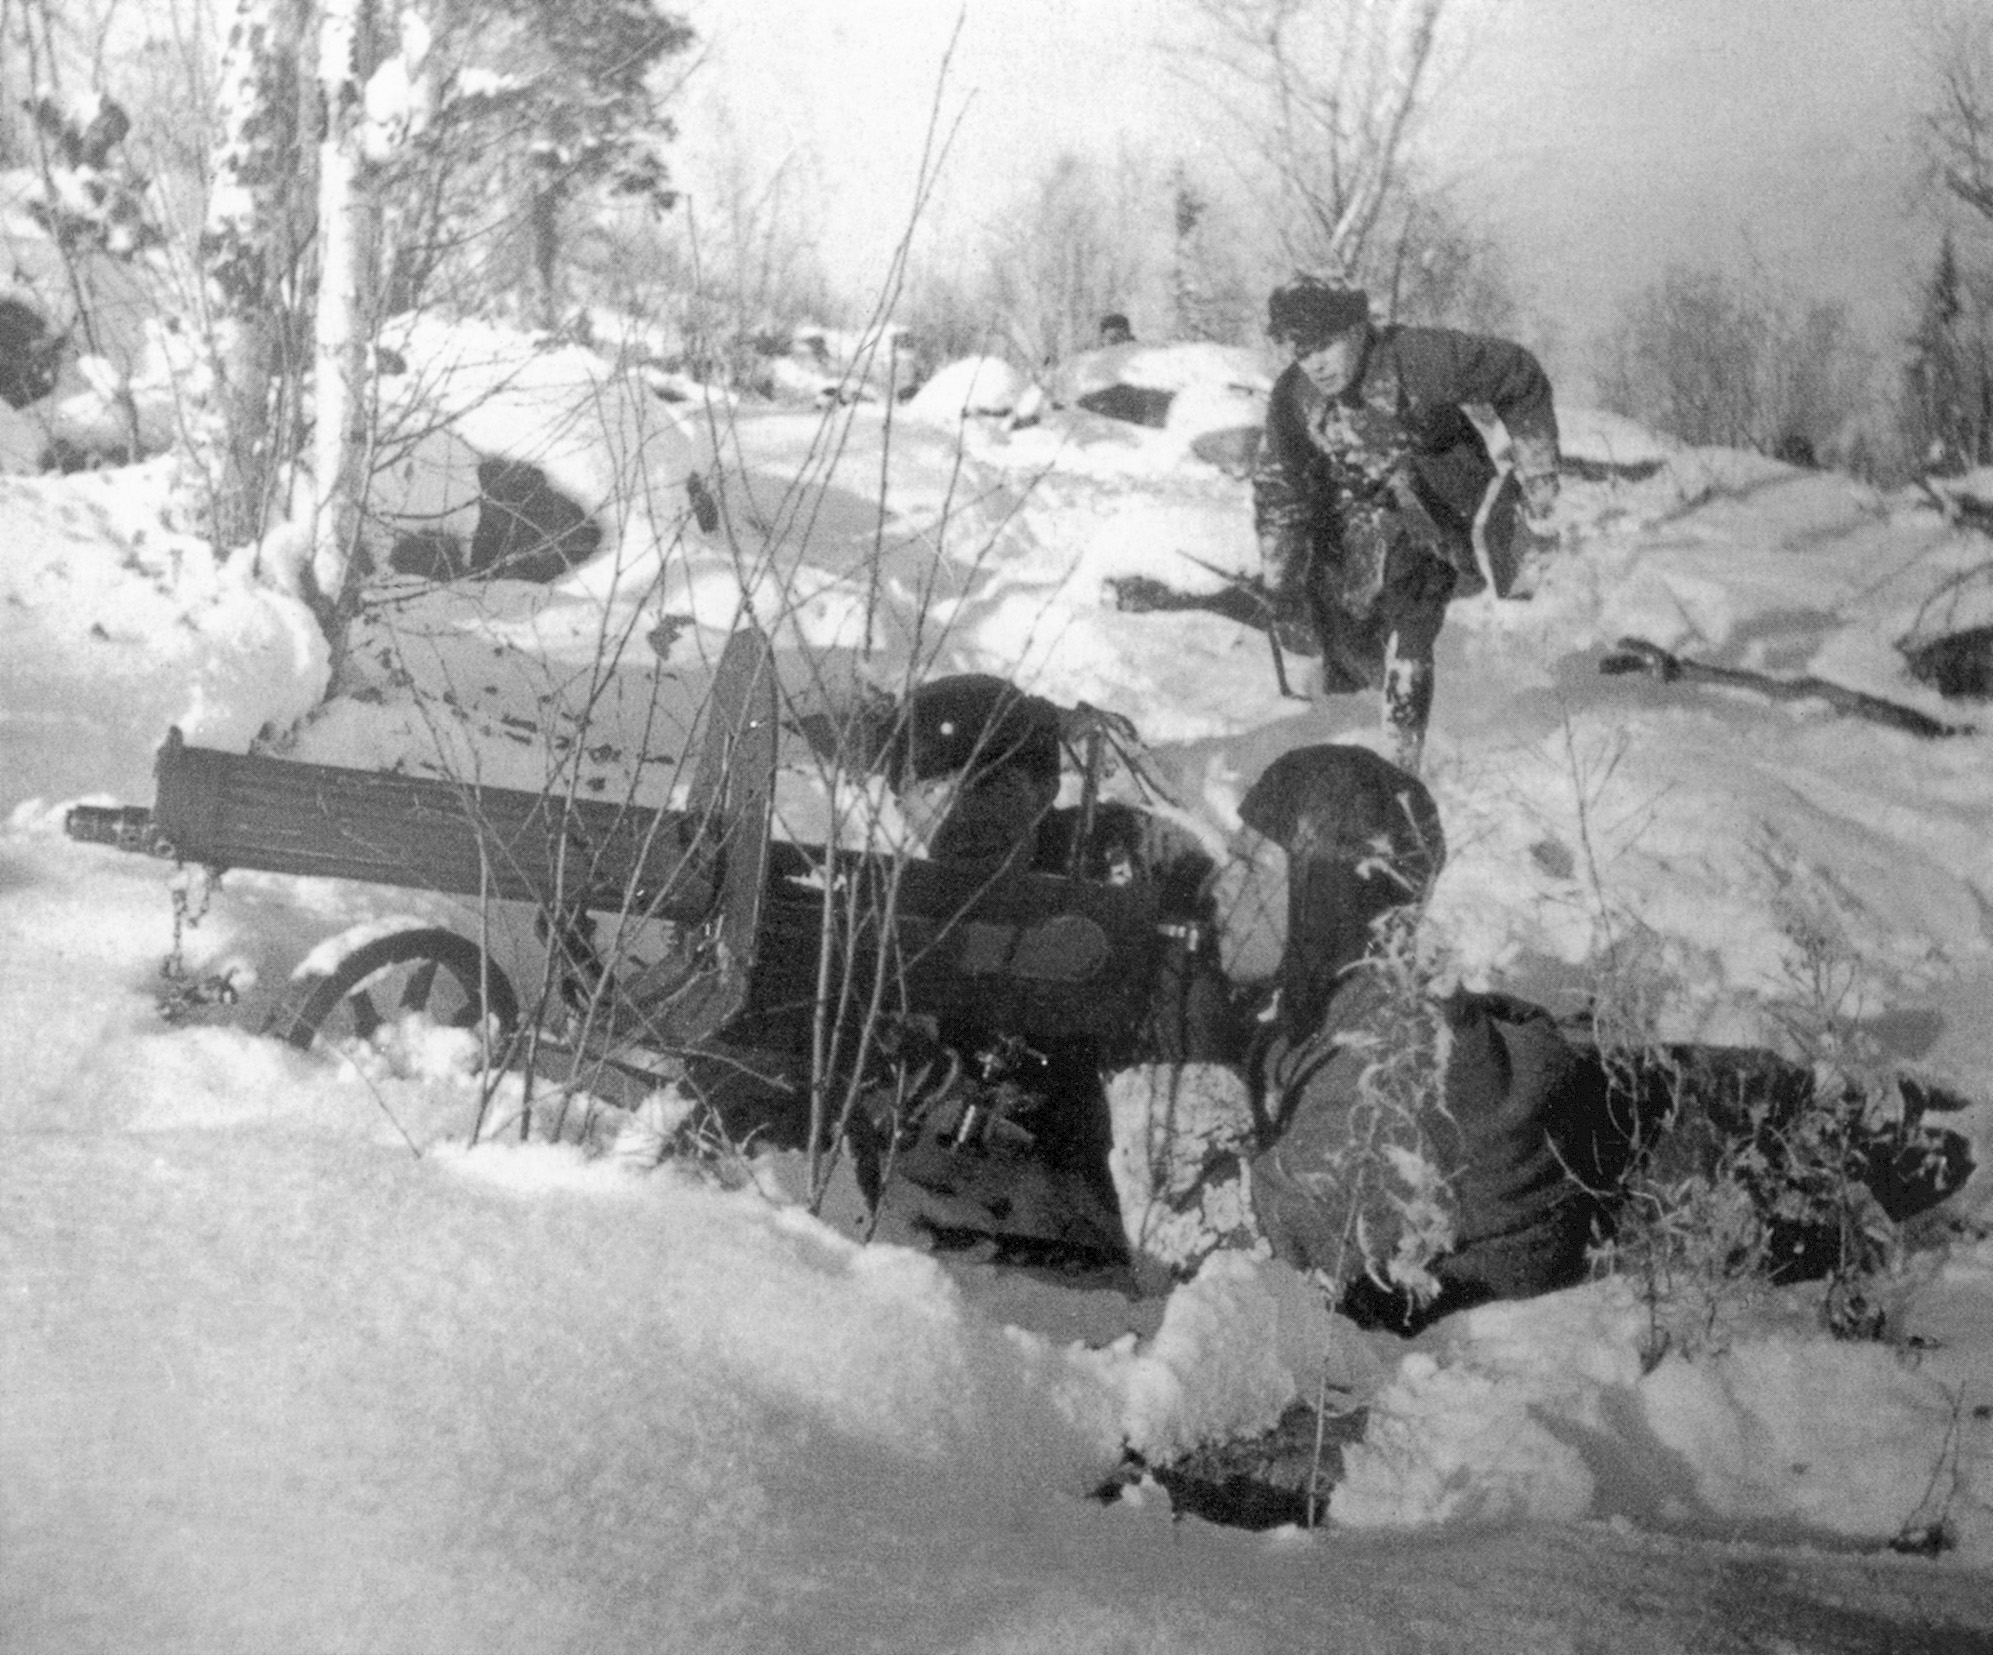 Their heavy machine gun clearly visible in the snow, Red Army soldiers support their comrades’ attacks against the Germans during the winter of 1941-1942. The Soviets were willing to sustain horrendous losses to relieve the Nazi pressure on their capital.